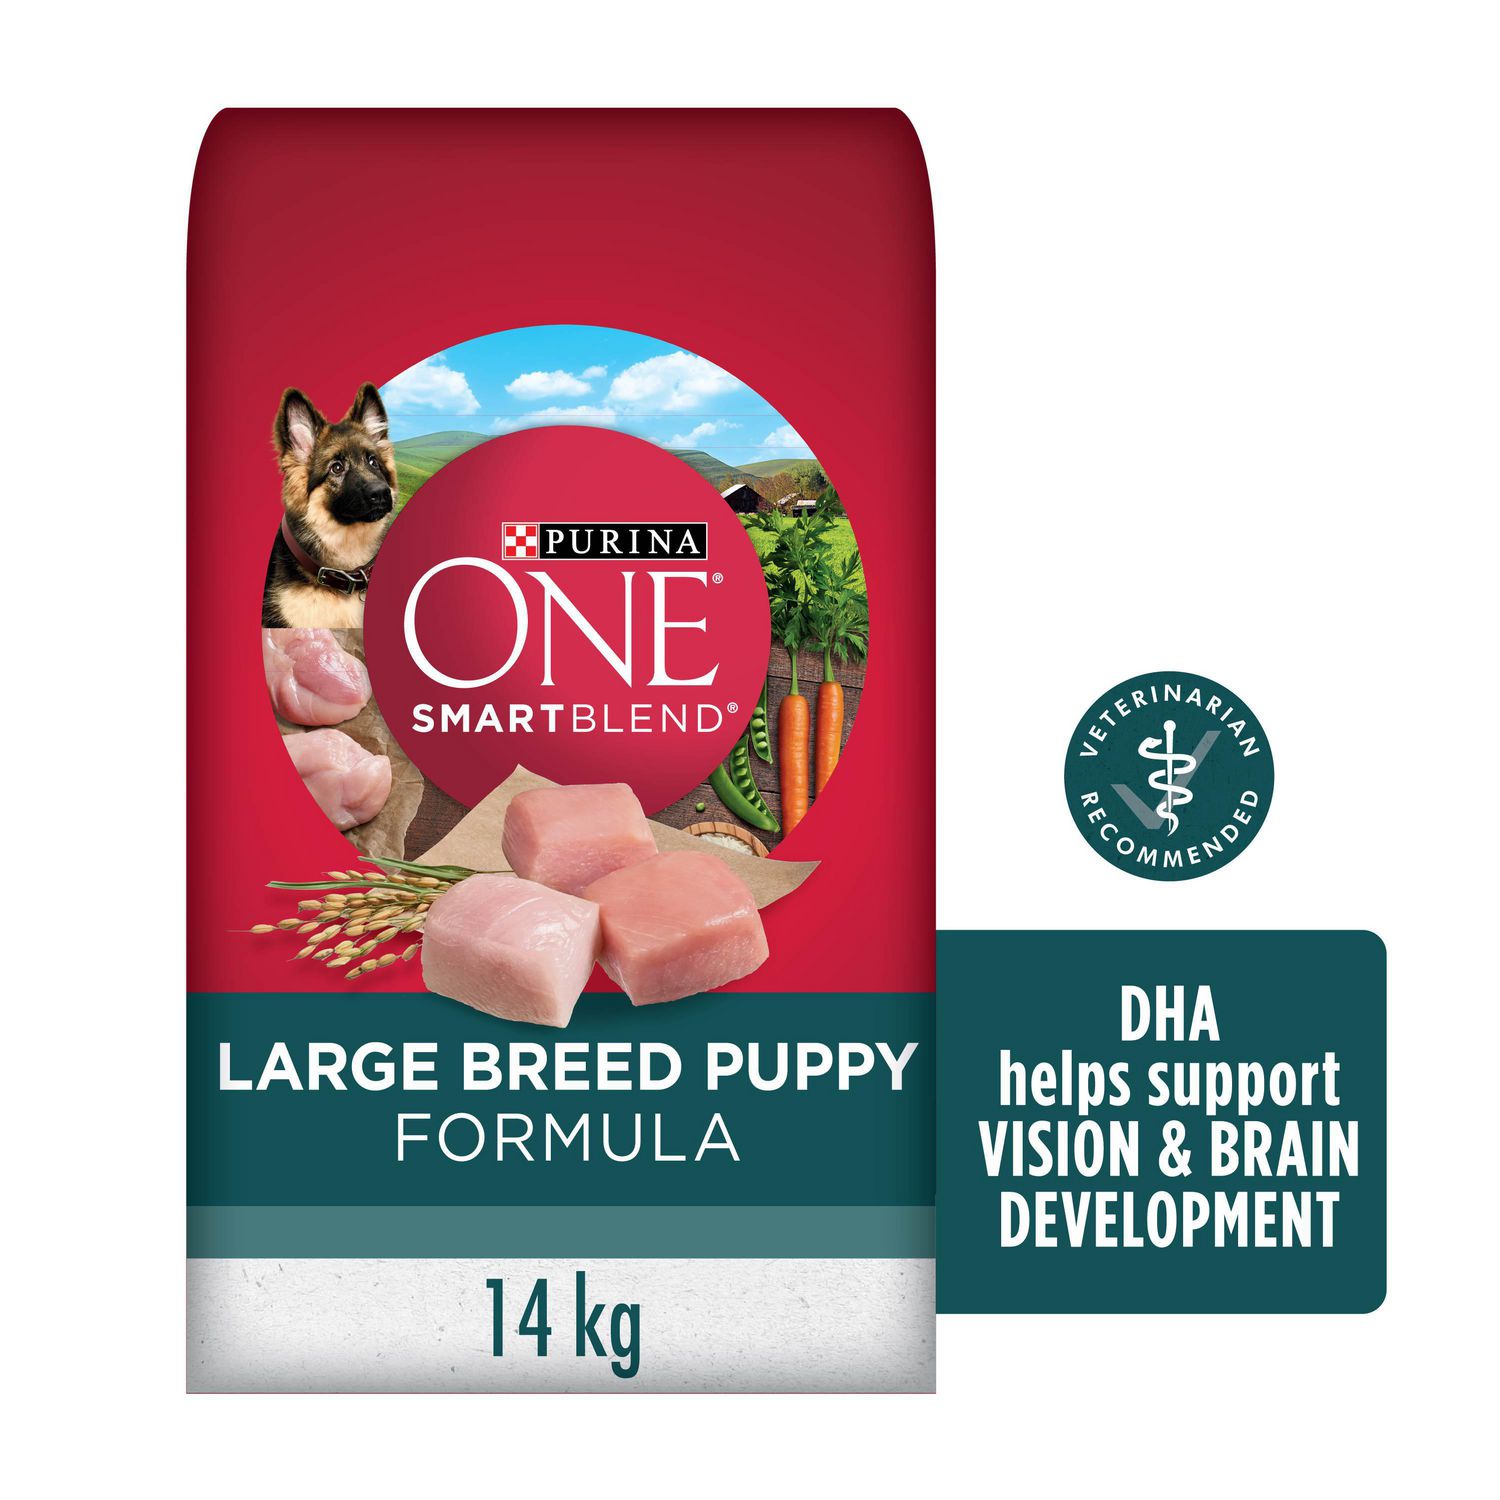 Purina ONE Smartblend Large Breed Puppy, Dry Dog Food 14 kg